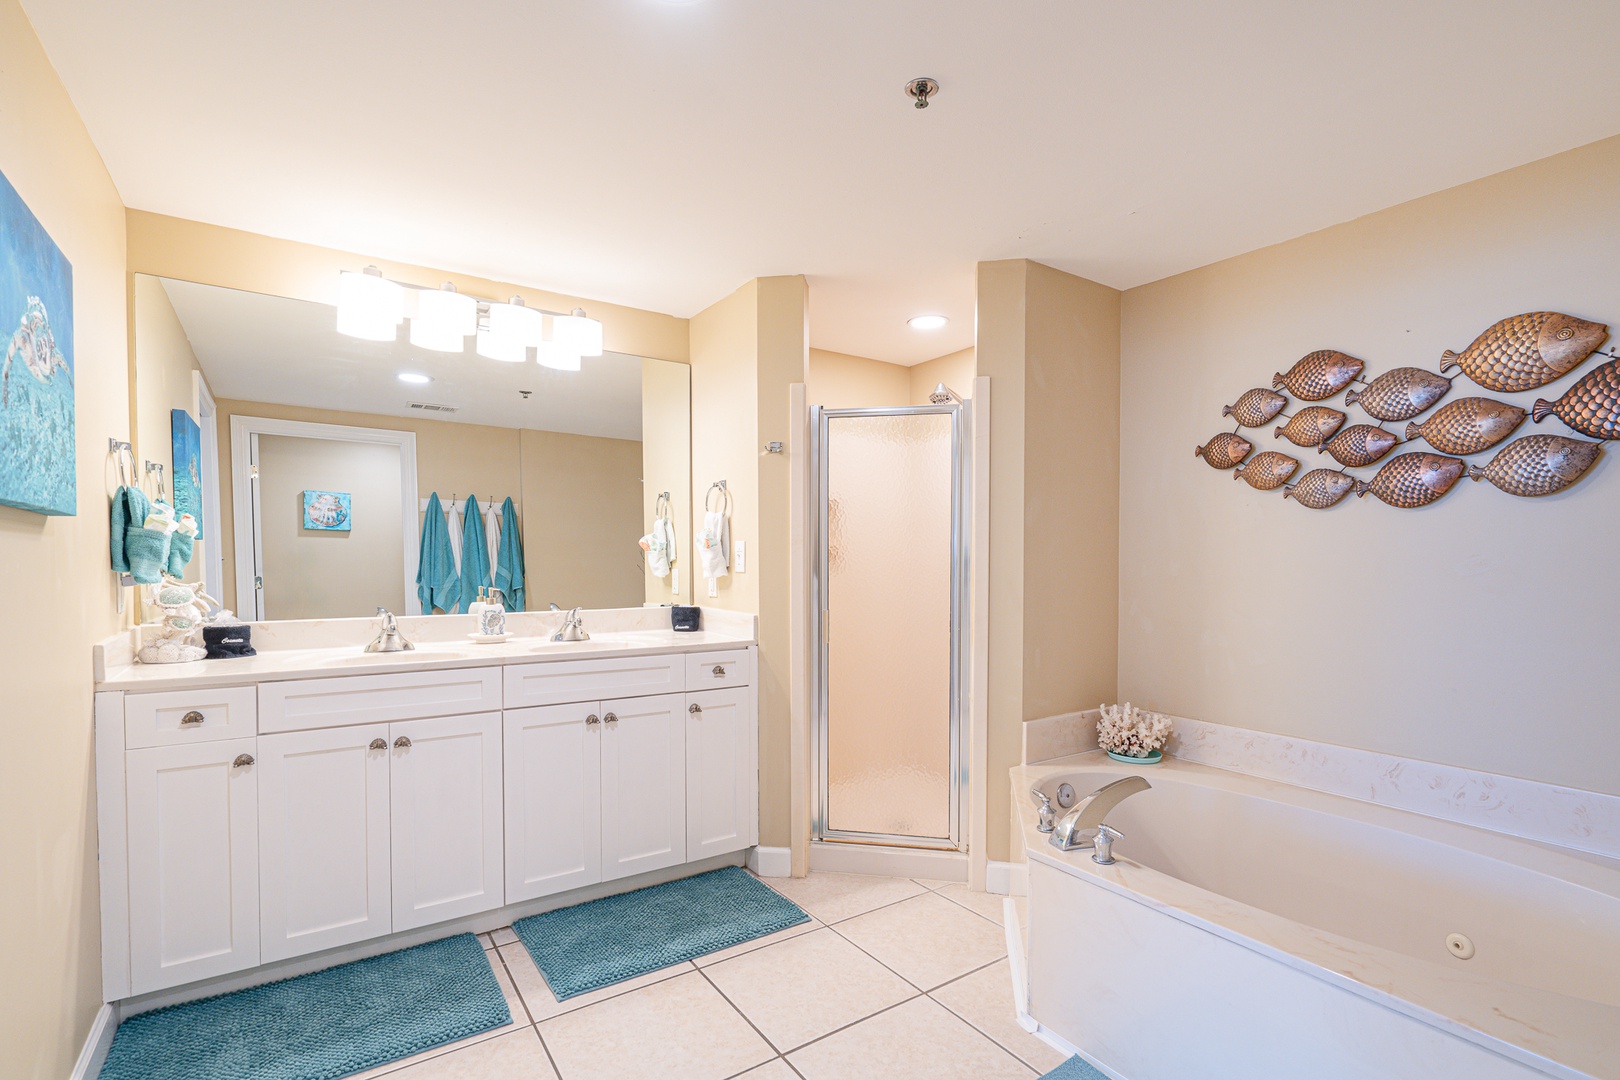 The master ensuite showcases a dual vanity, glass shower, & soaking tub